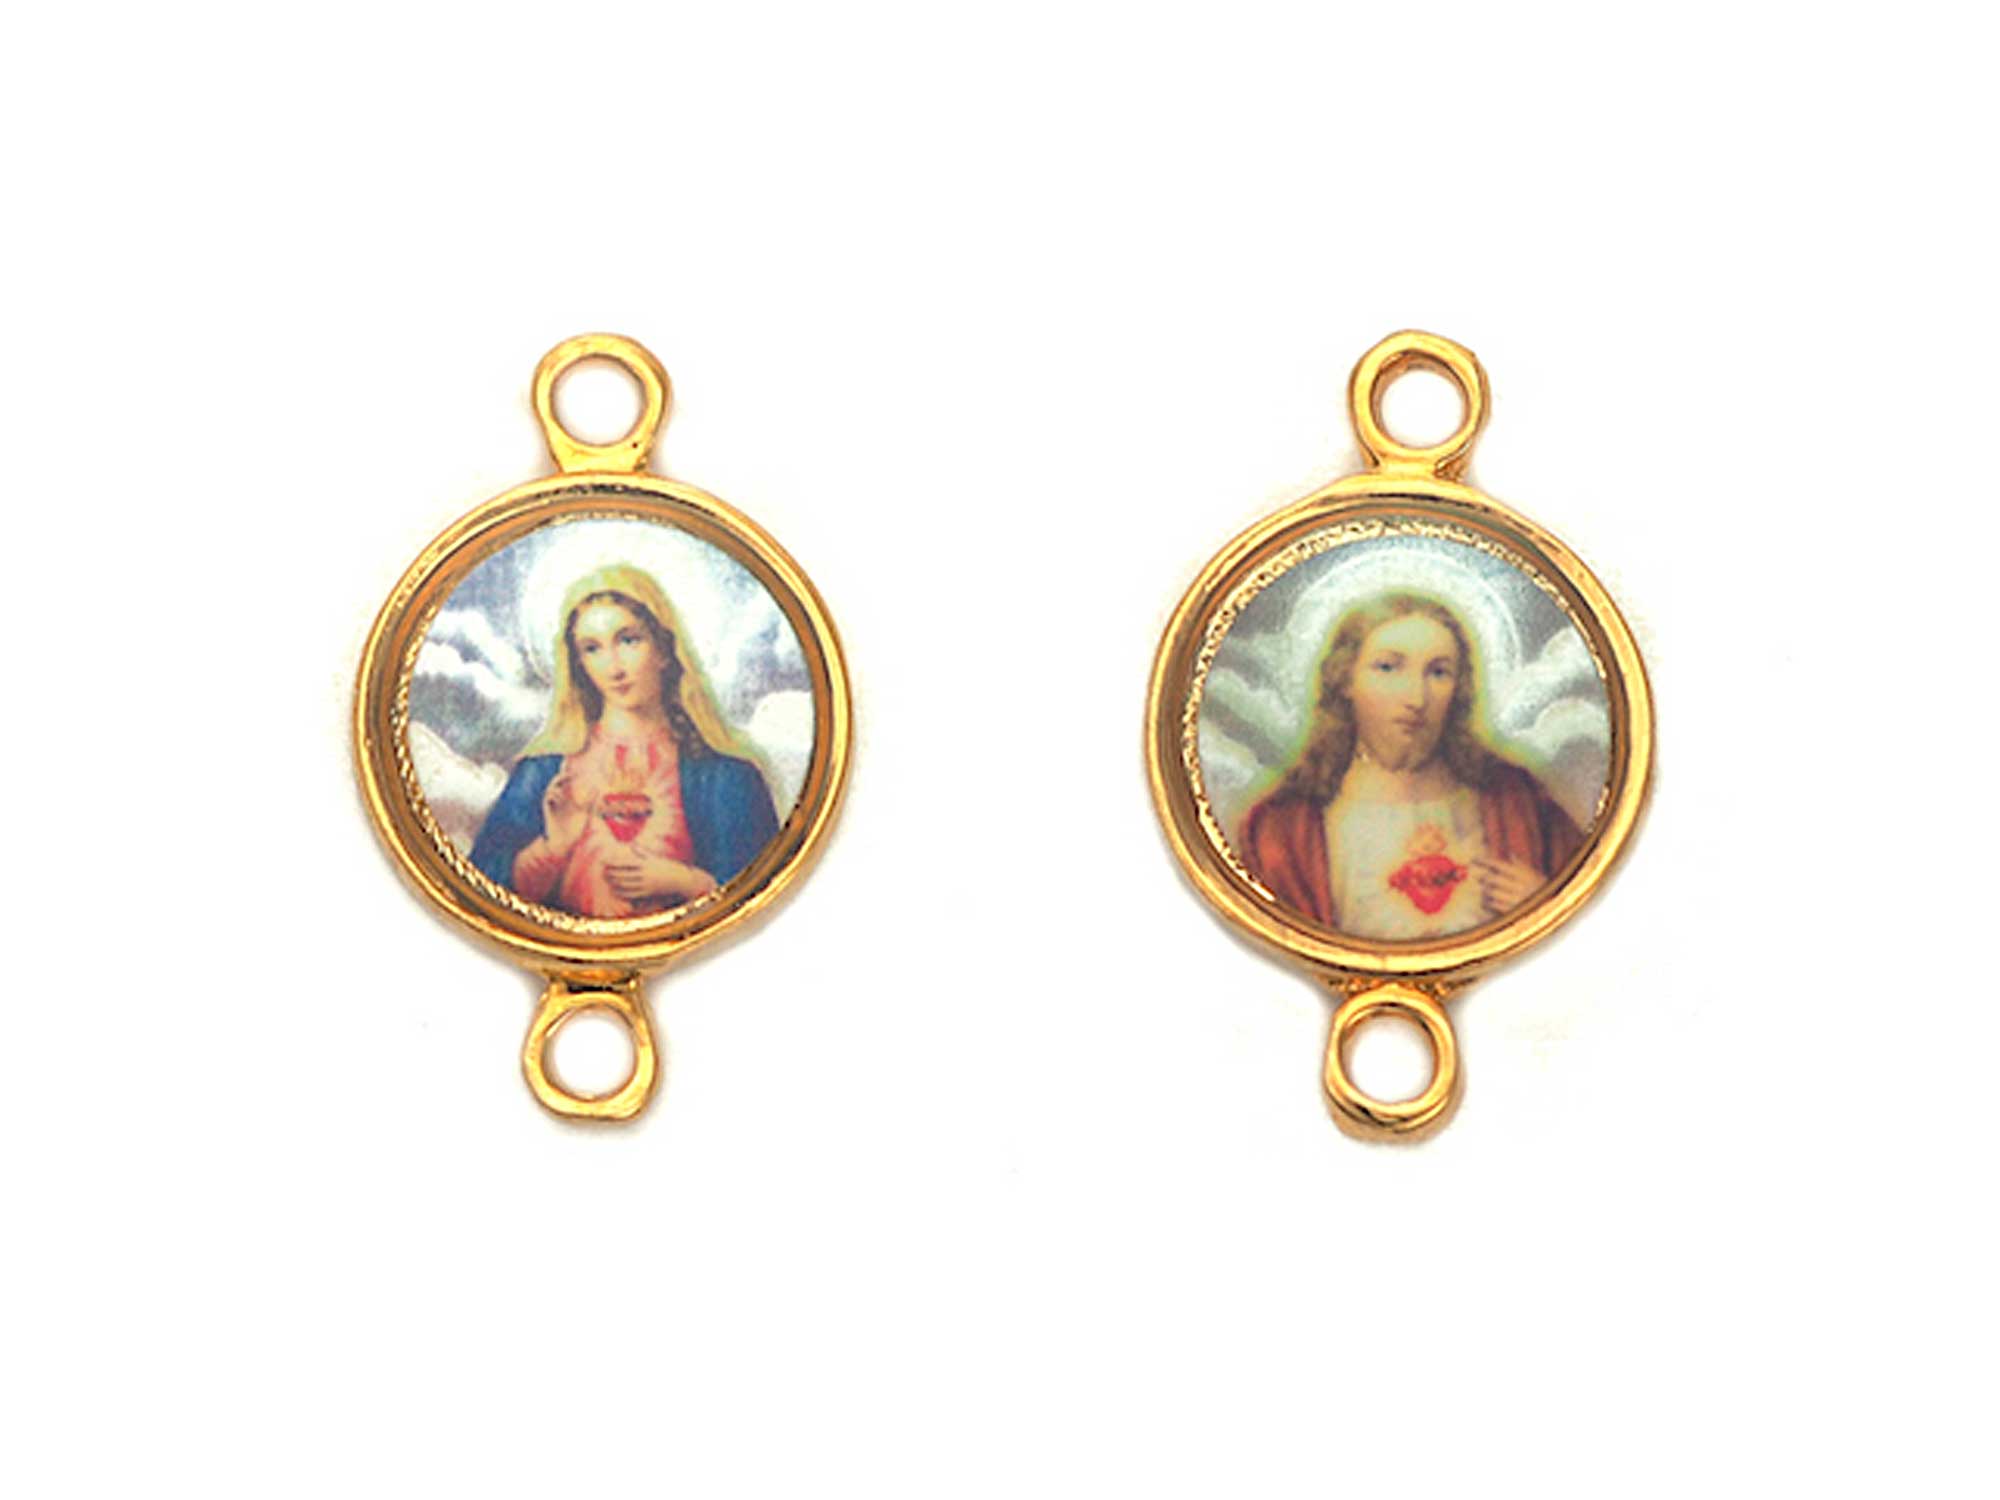 Rosary Centerpiece ~ Enamel and Gold Plated Center for Rosaries, made in Italy, P569